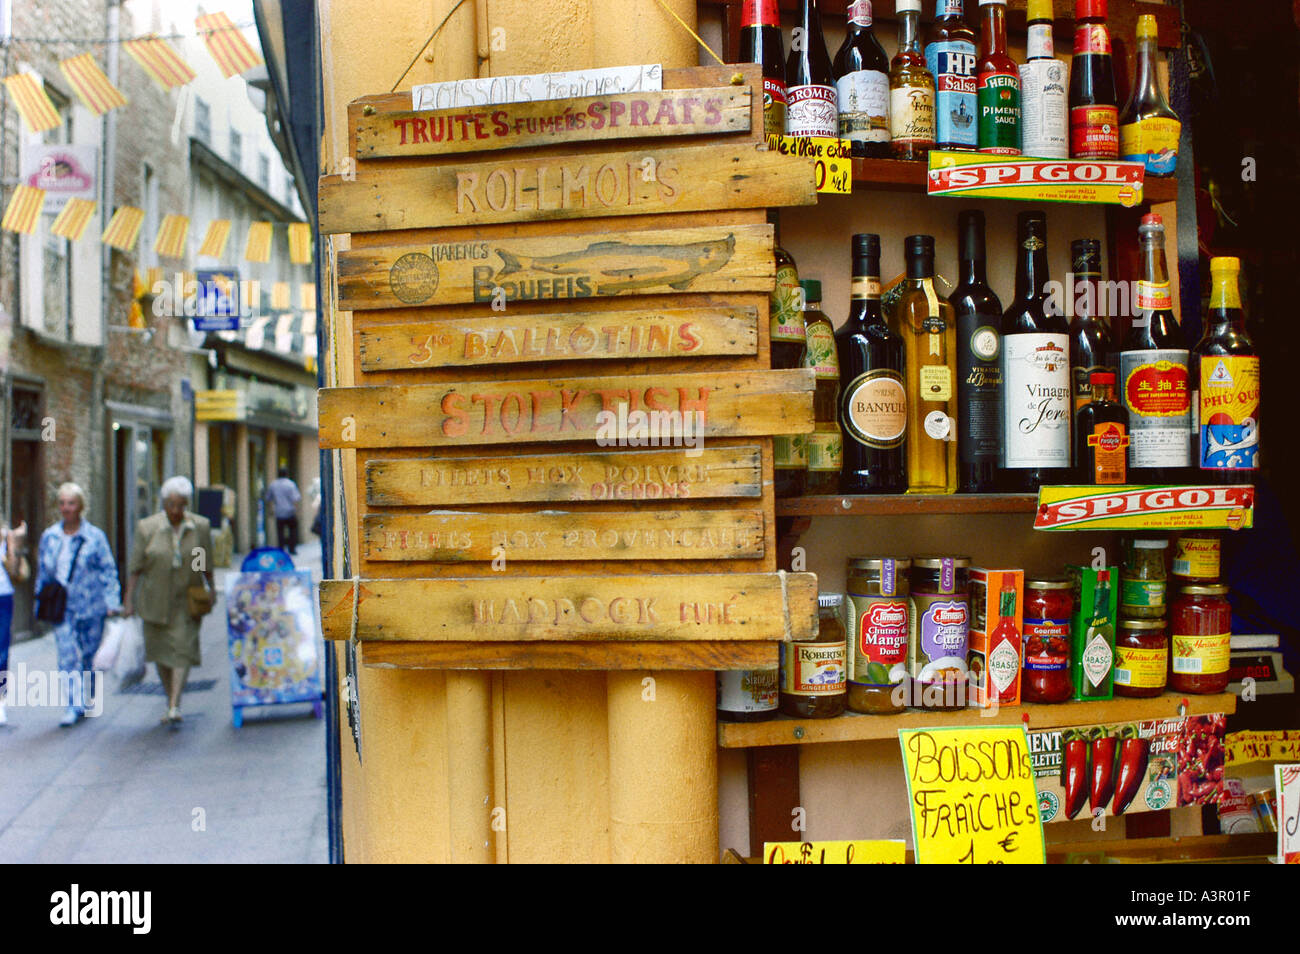 Perpignan France, Local Products on Display in Grocery Foods Store, Provence Street, French Delicatessen, Stock Photo